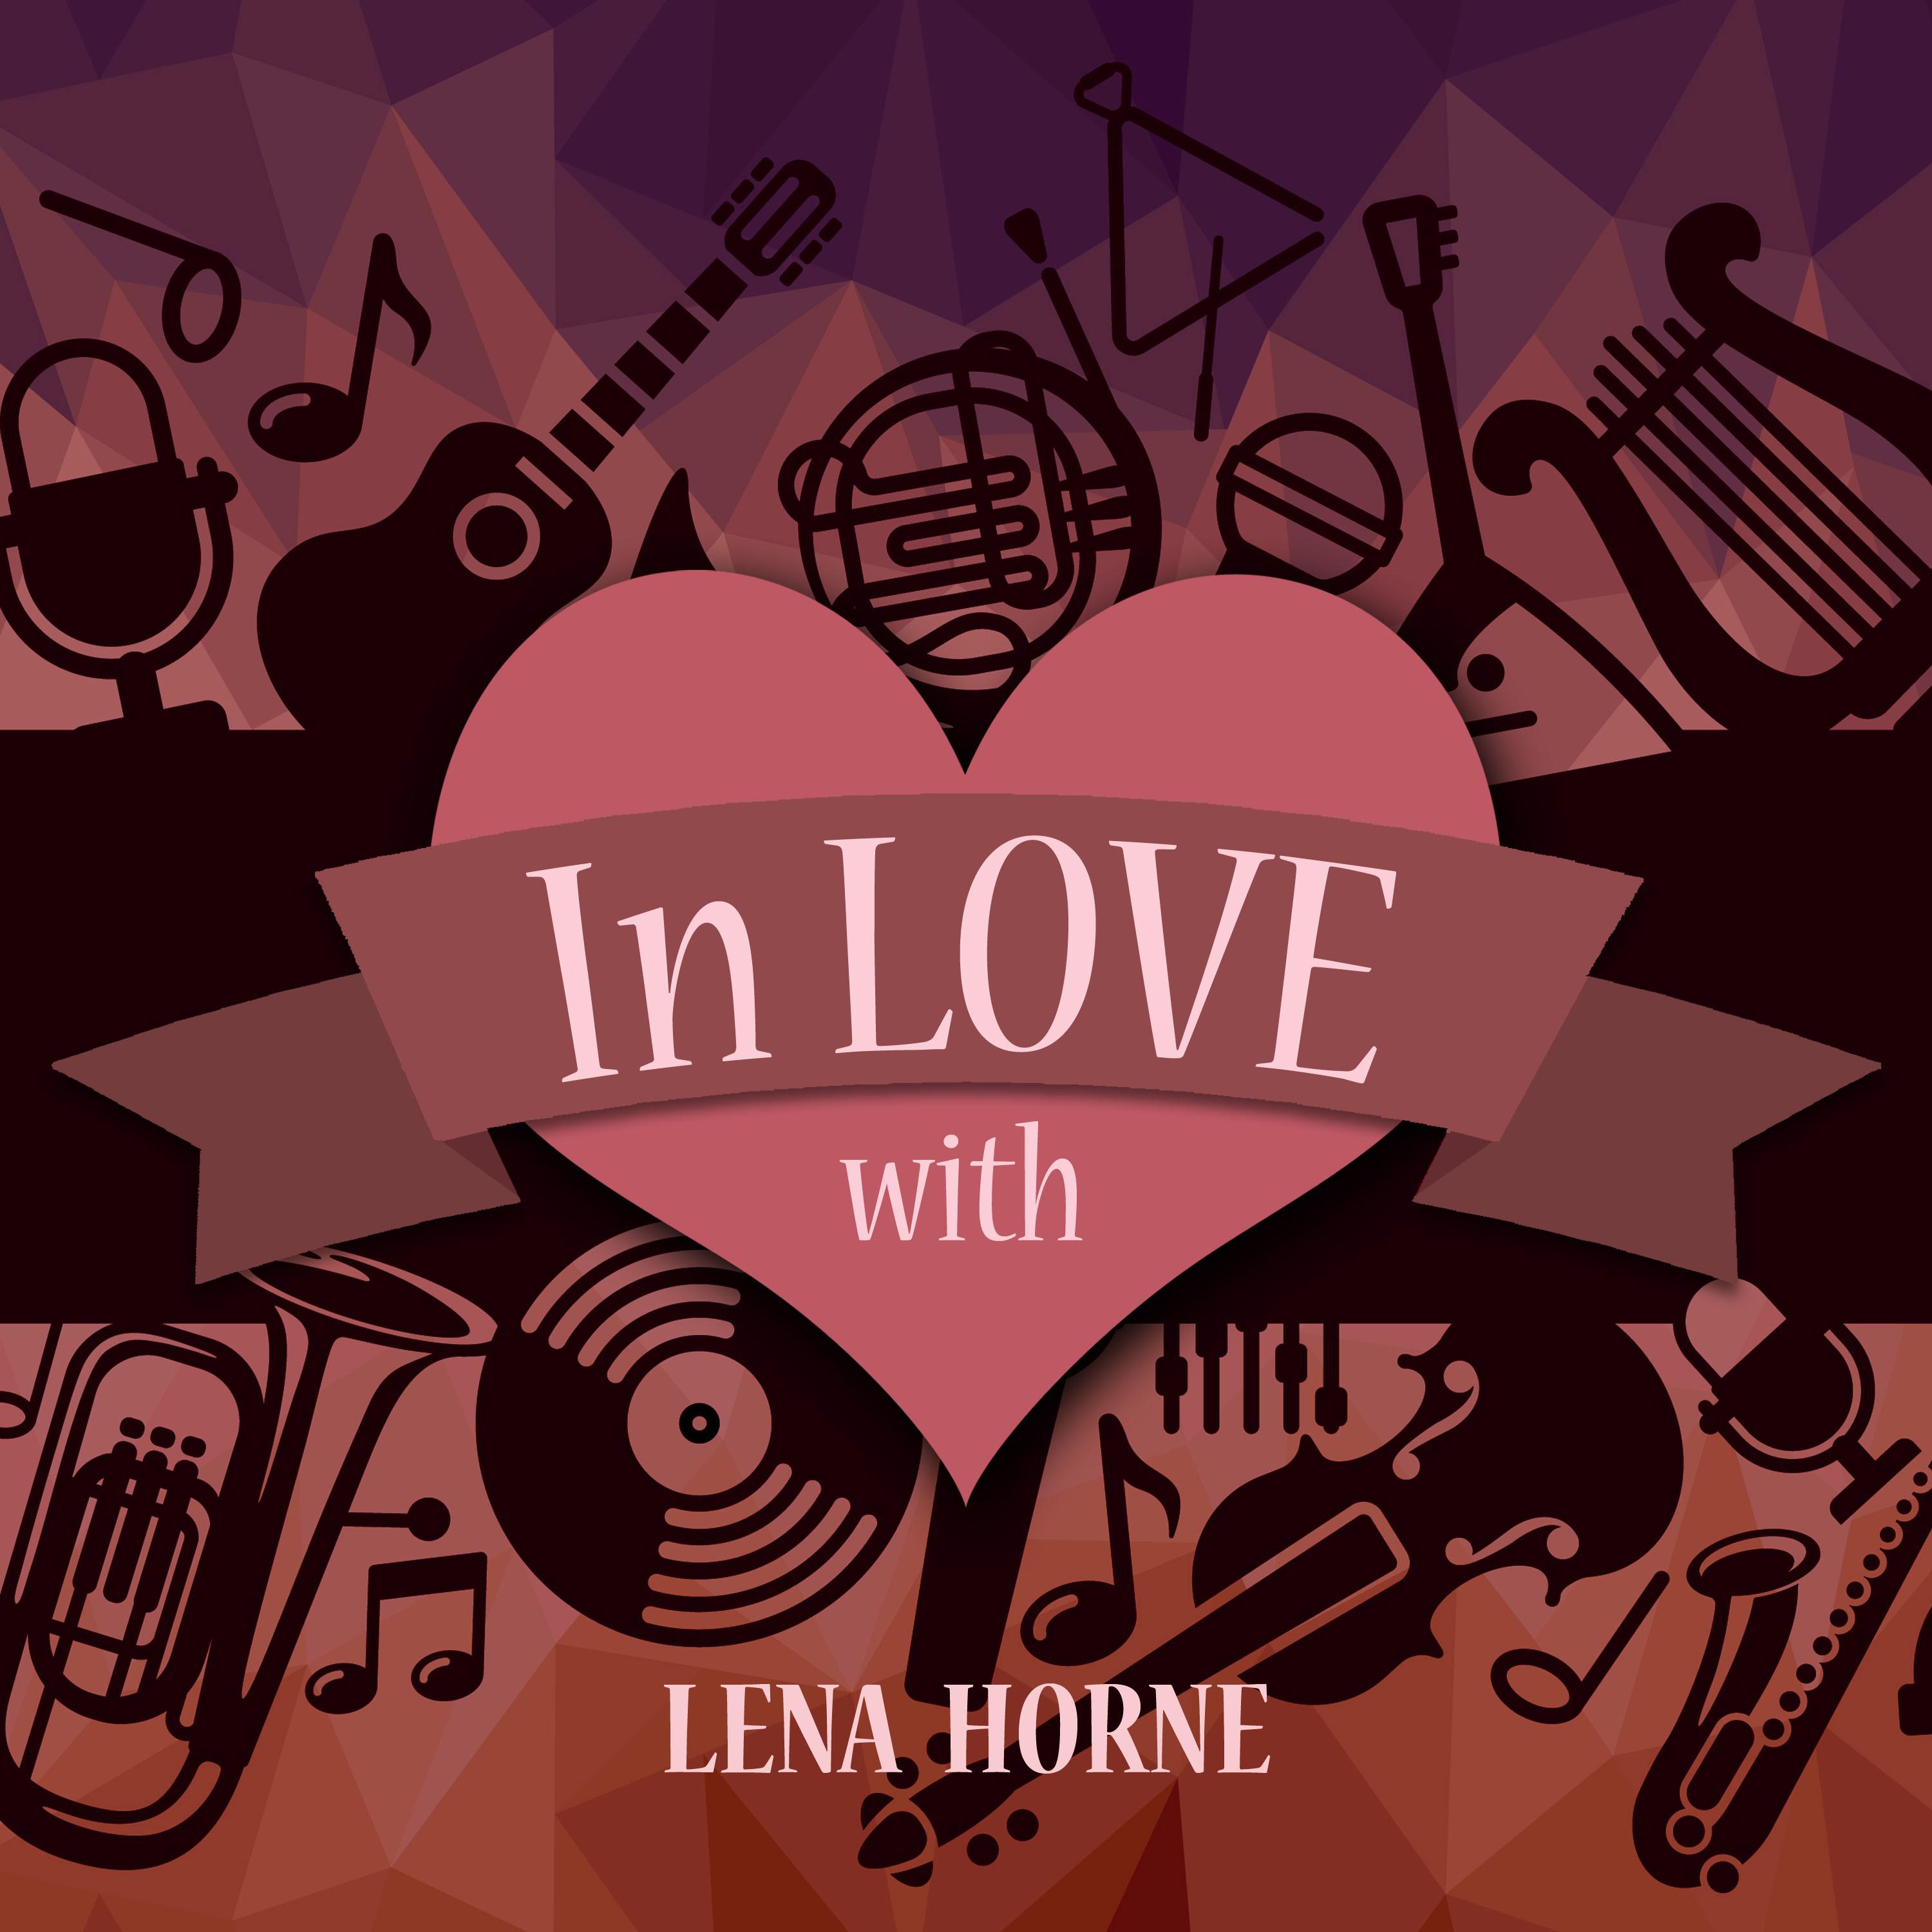 In Love with Lena Horne